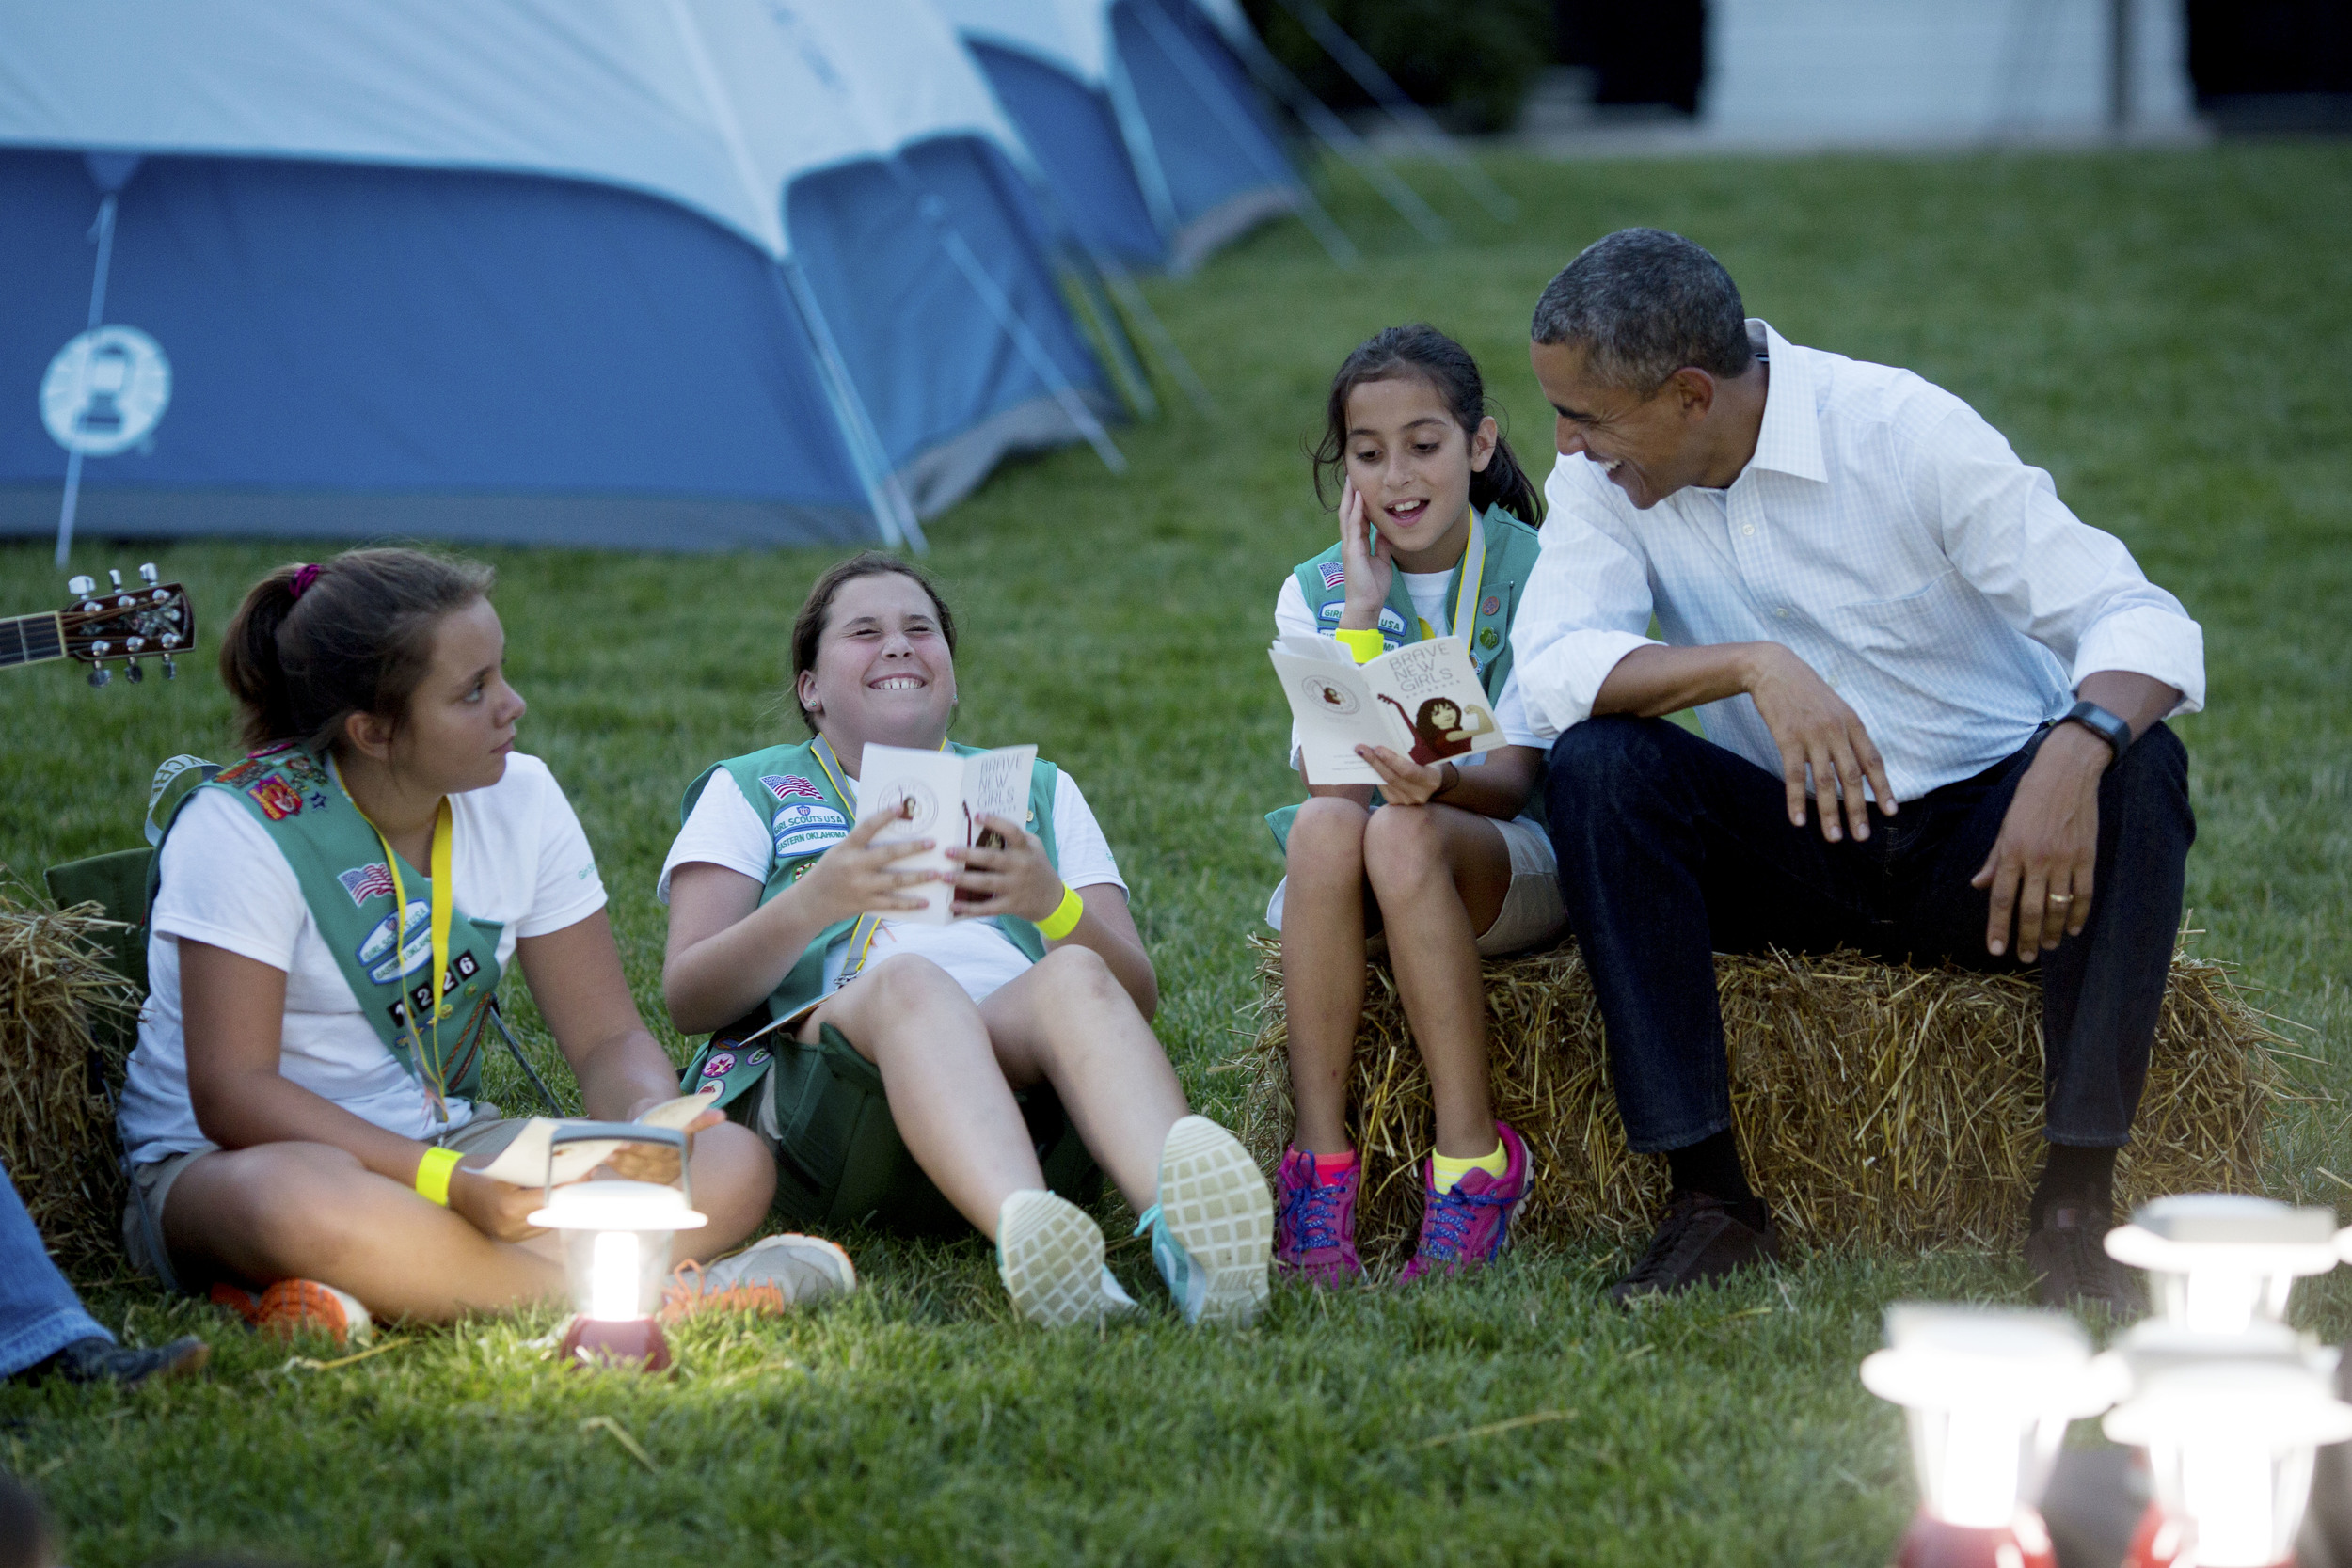 President Barack Obama and First Lady Michelle Obama sing songs with Girl Scouts during the White House Campout, as part of "Let's Move! Outside" on the South Lawn - 2015.